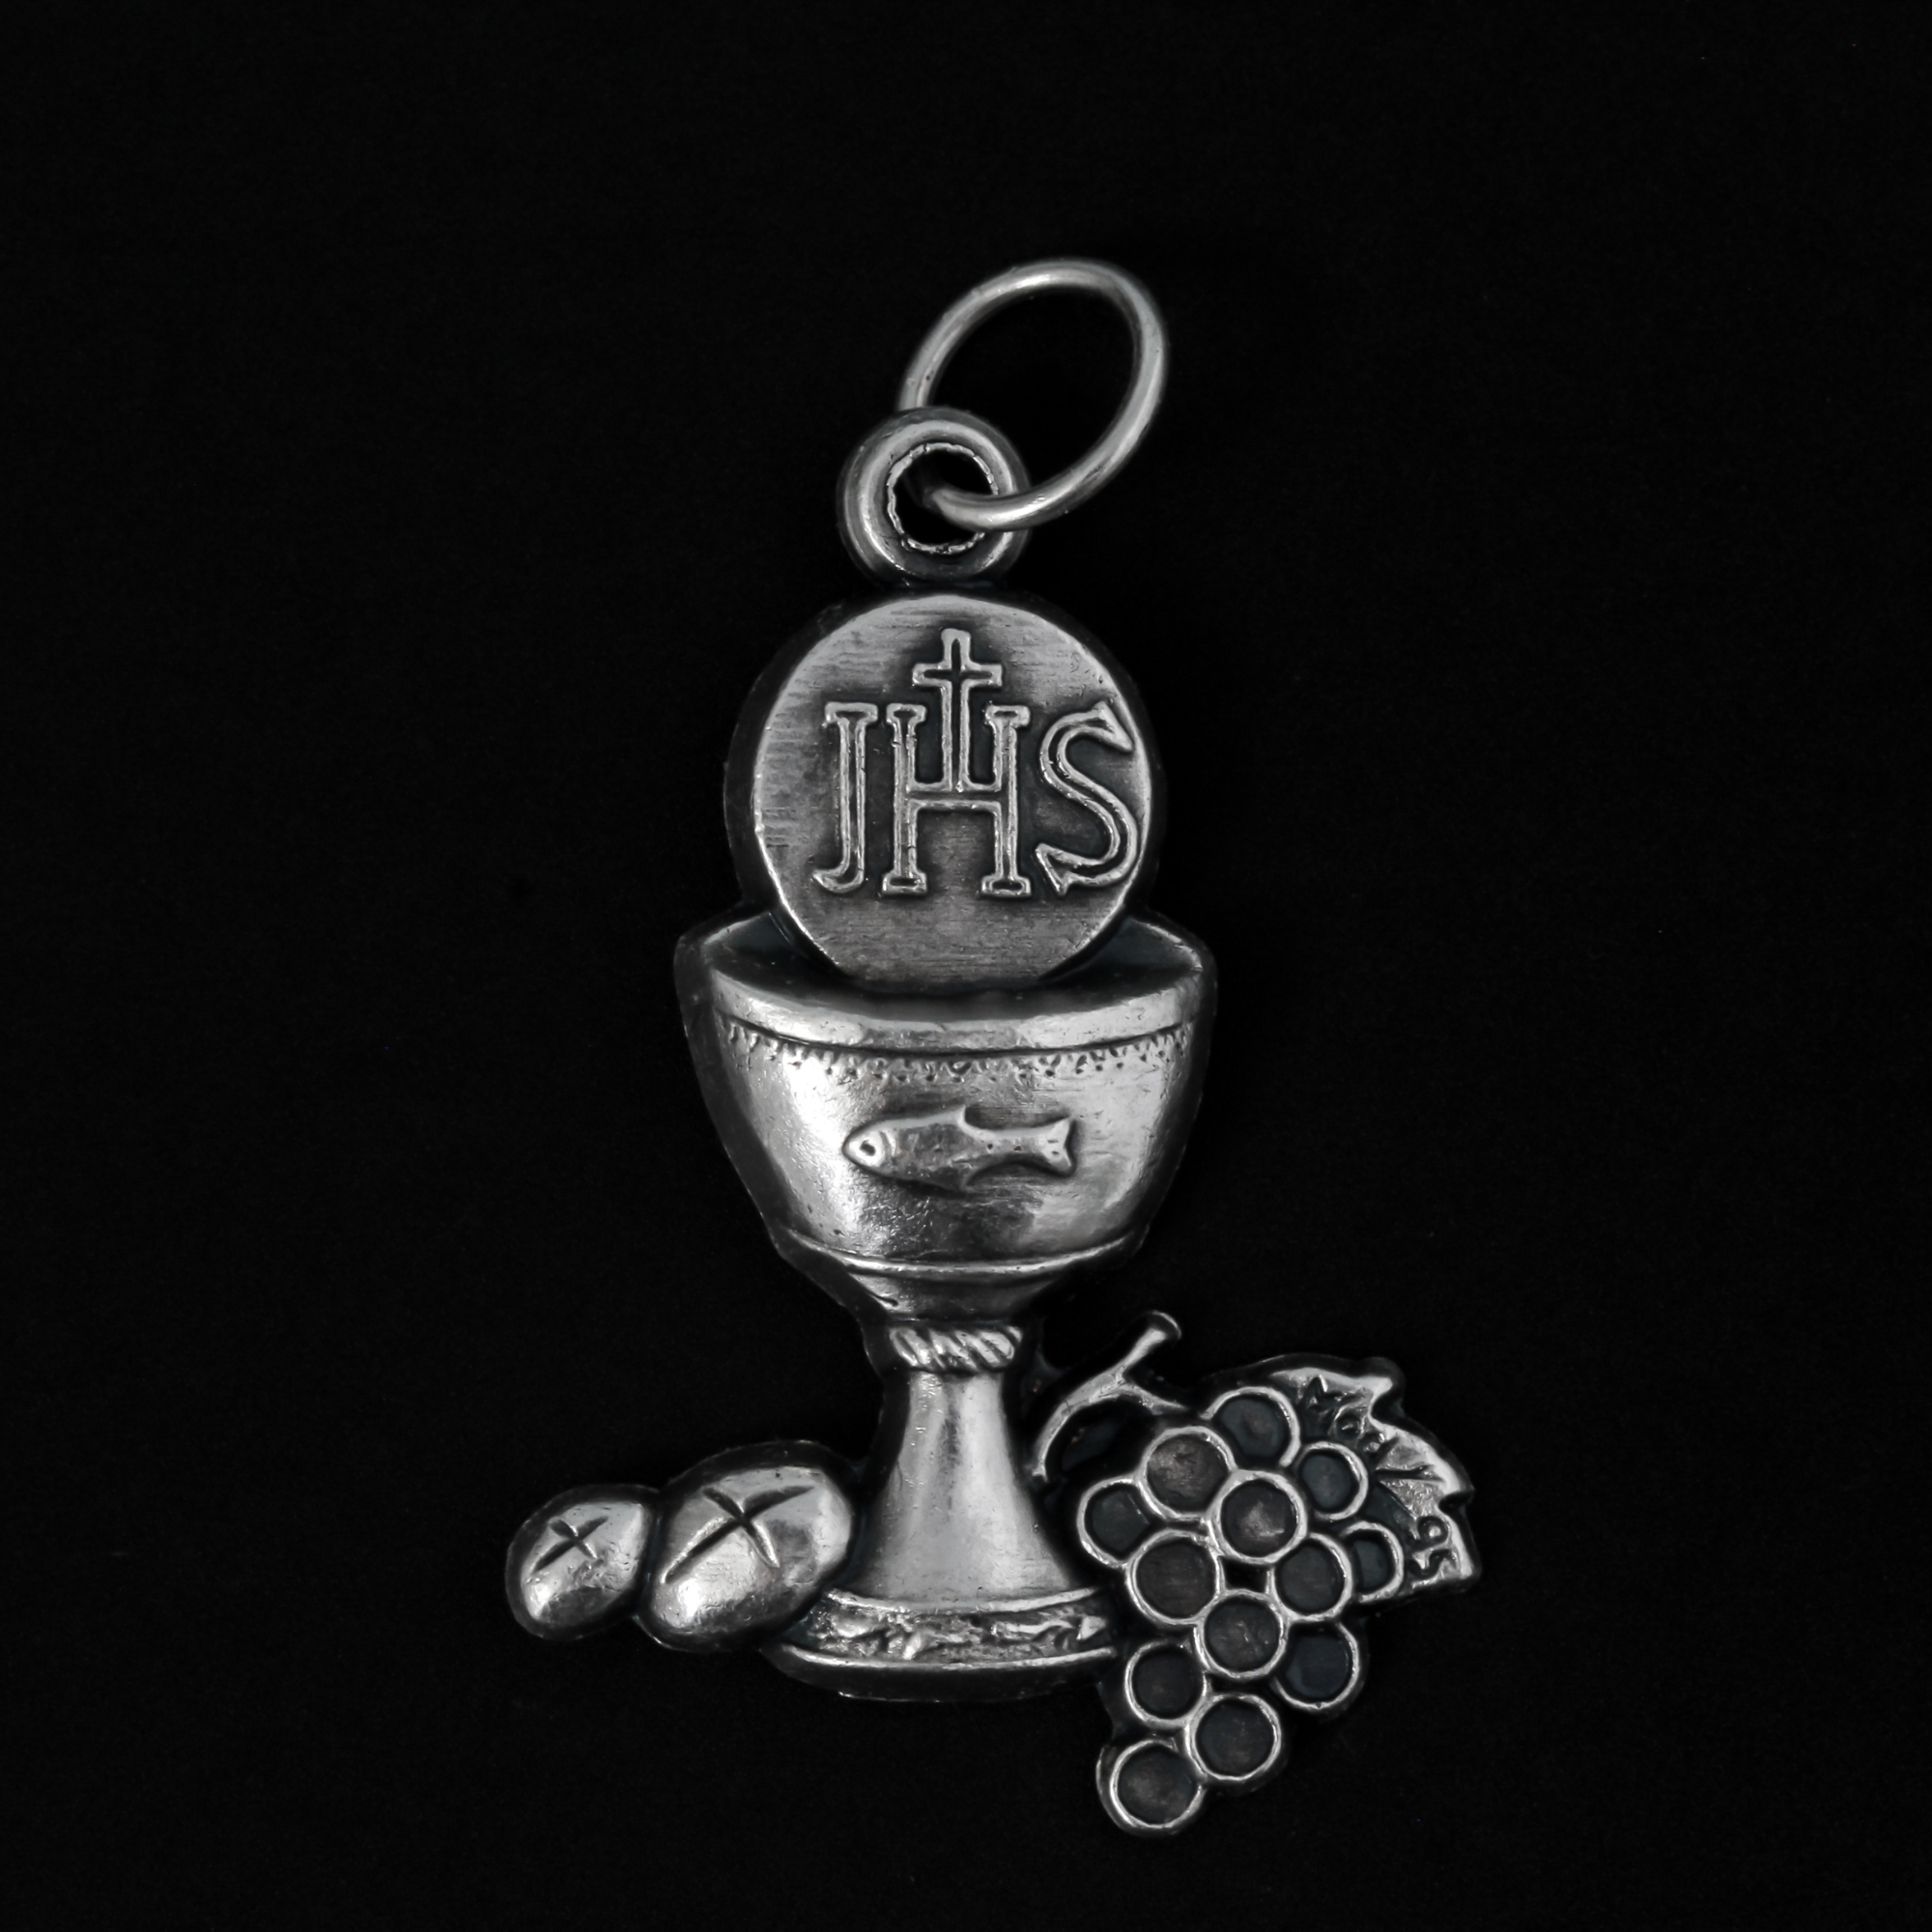 Communion Chalice charm that has the image of Jesus Ecce Homo, on the backside